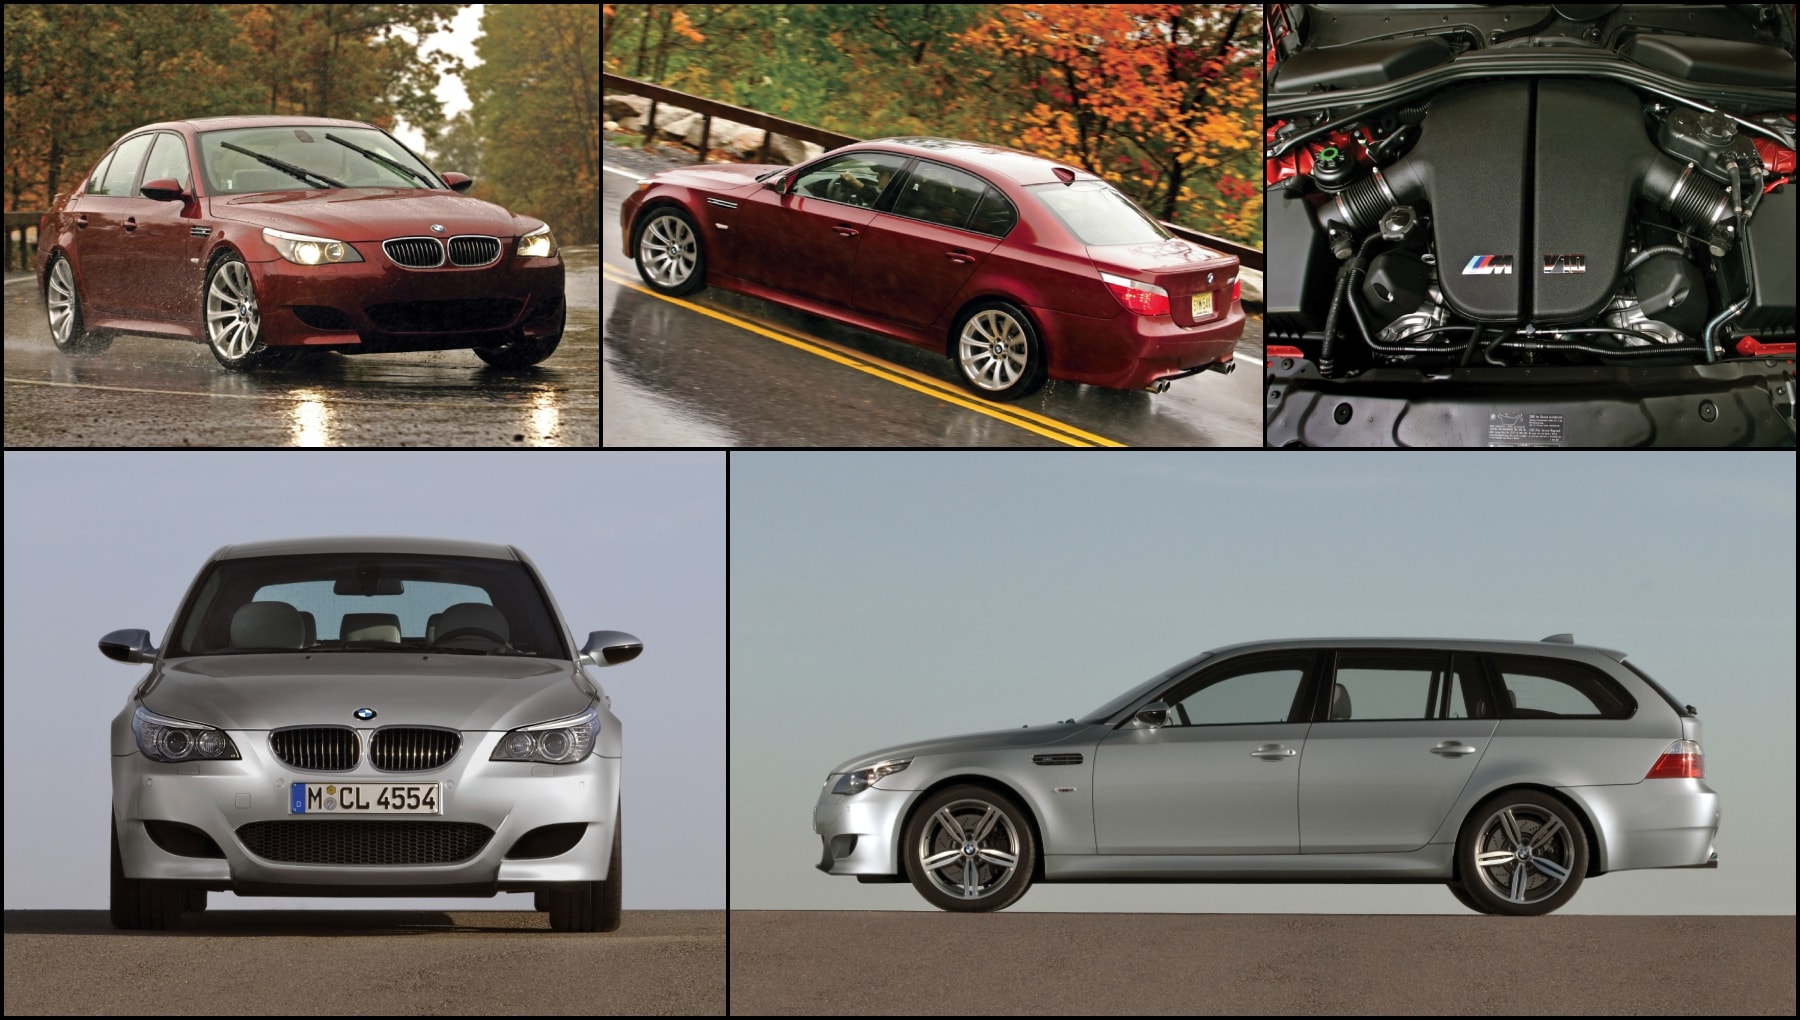 https://s1.cdn.autoevolution.com/images/news/remembering-the-e60-bmw-m5-sedan-and-e61-bmw-m5-touring-10-is-the-sweet-spot-214967_1.jpg